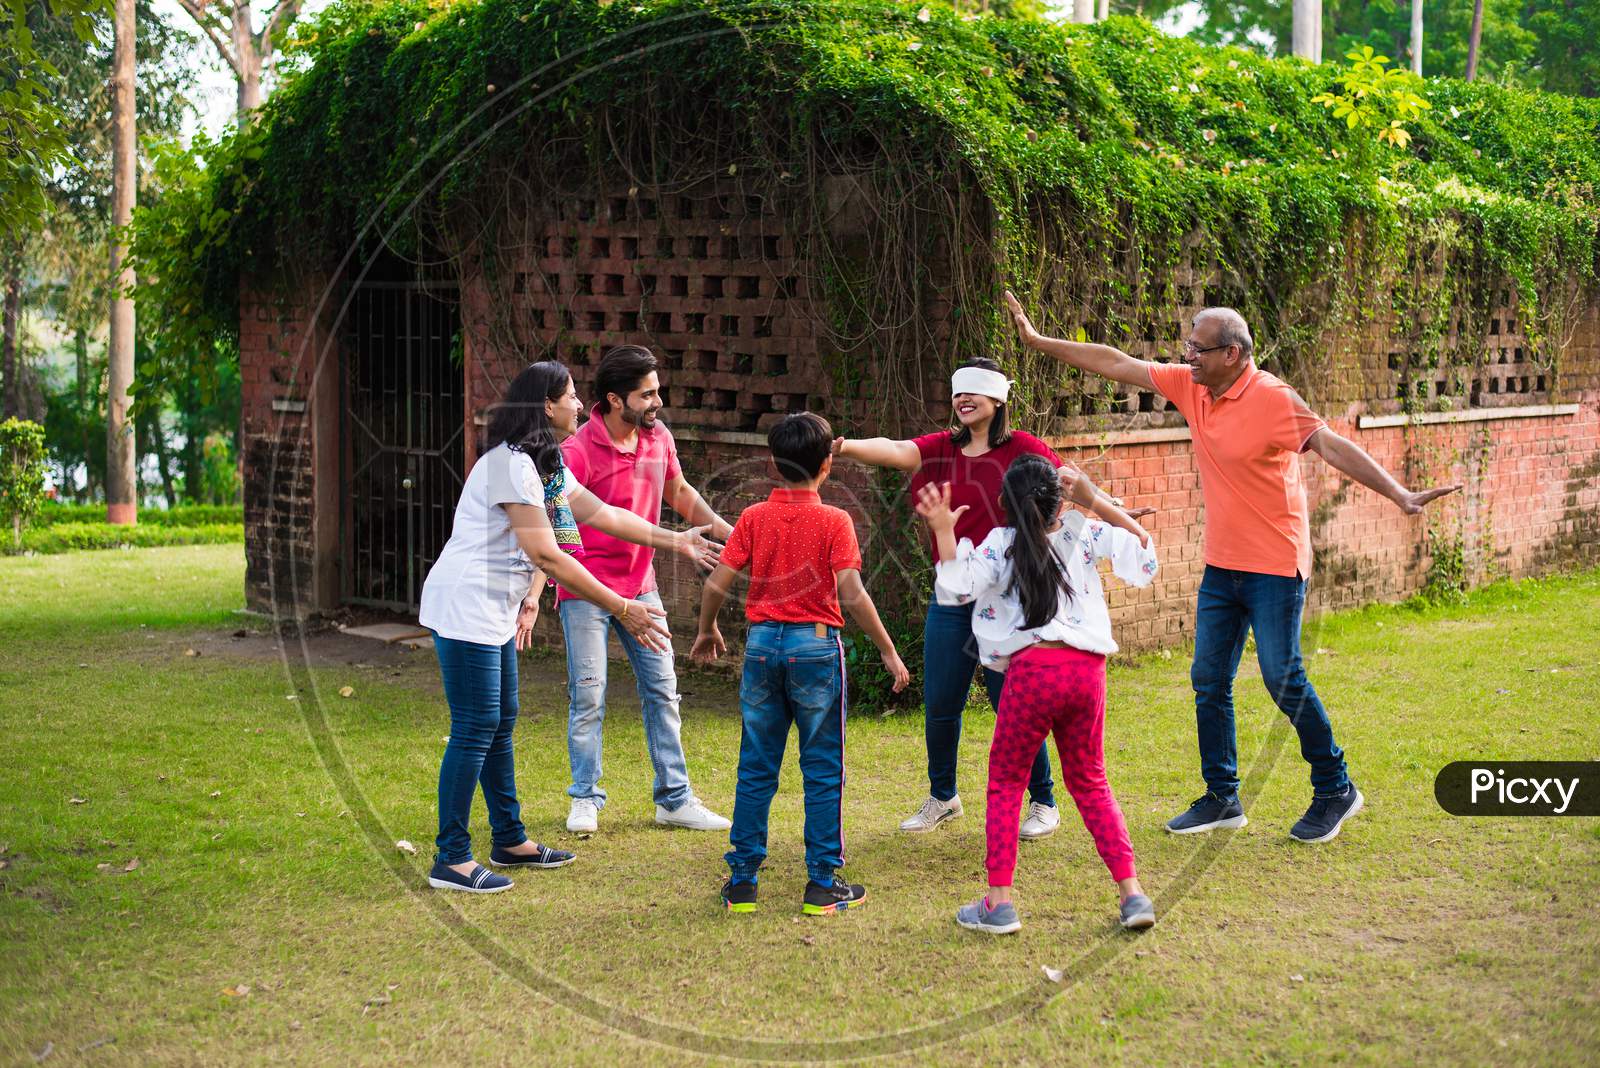 Indian Family playing blindfold game in park or garden